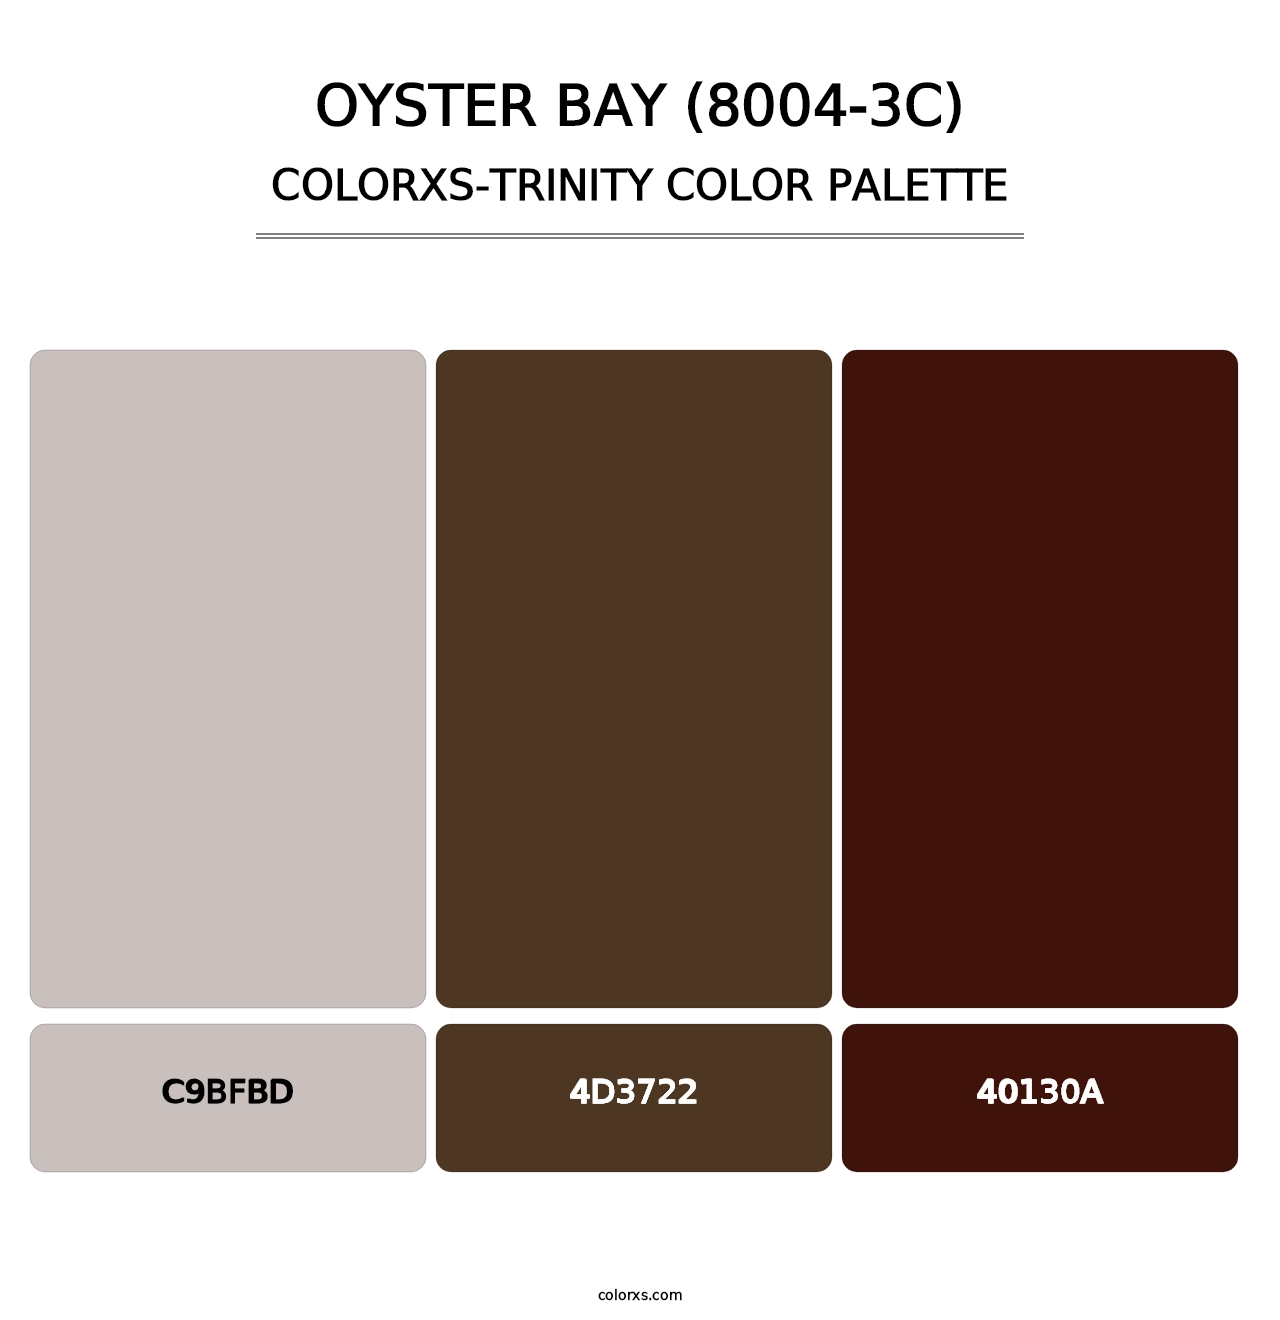 Oyster Bay (8004-3C) - Colorxs Trinity Palette